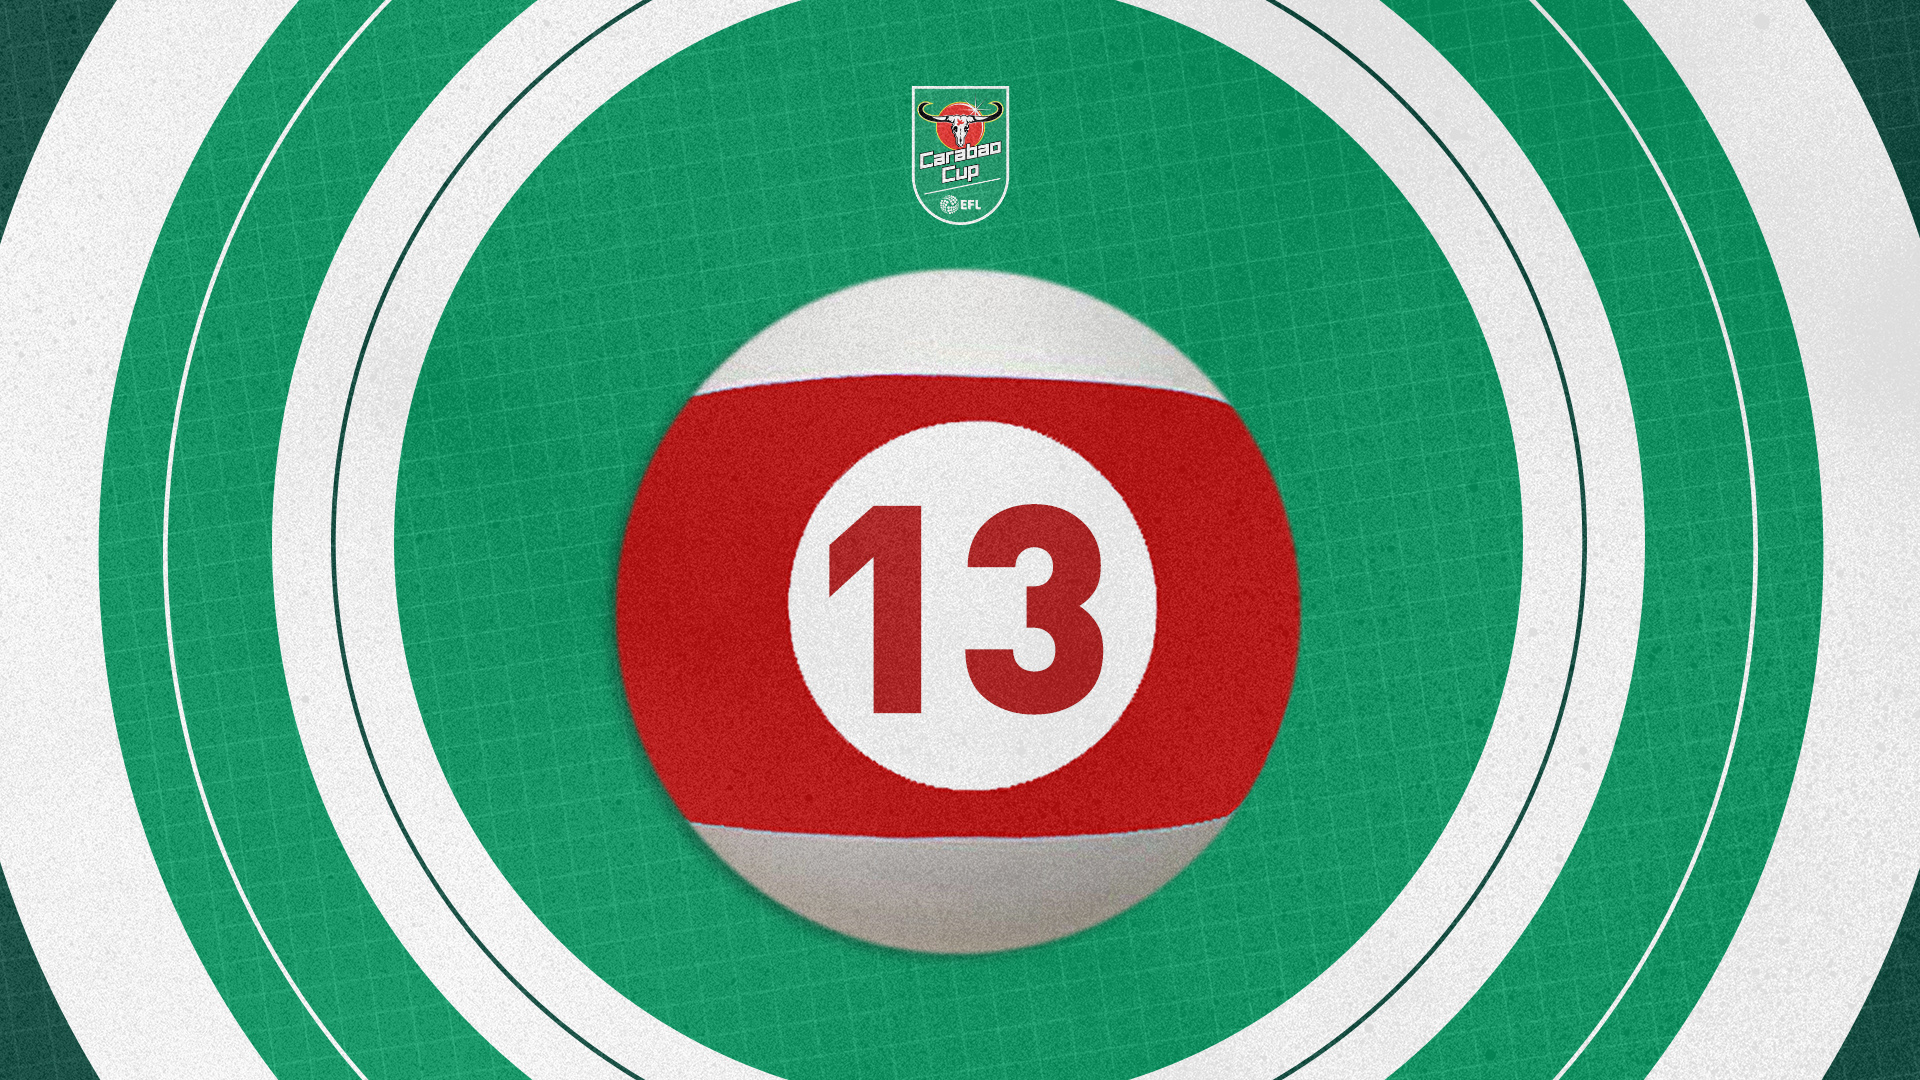 A ball showing number 13